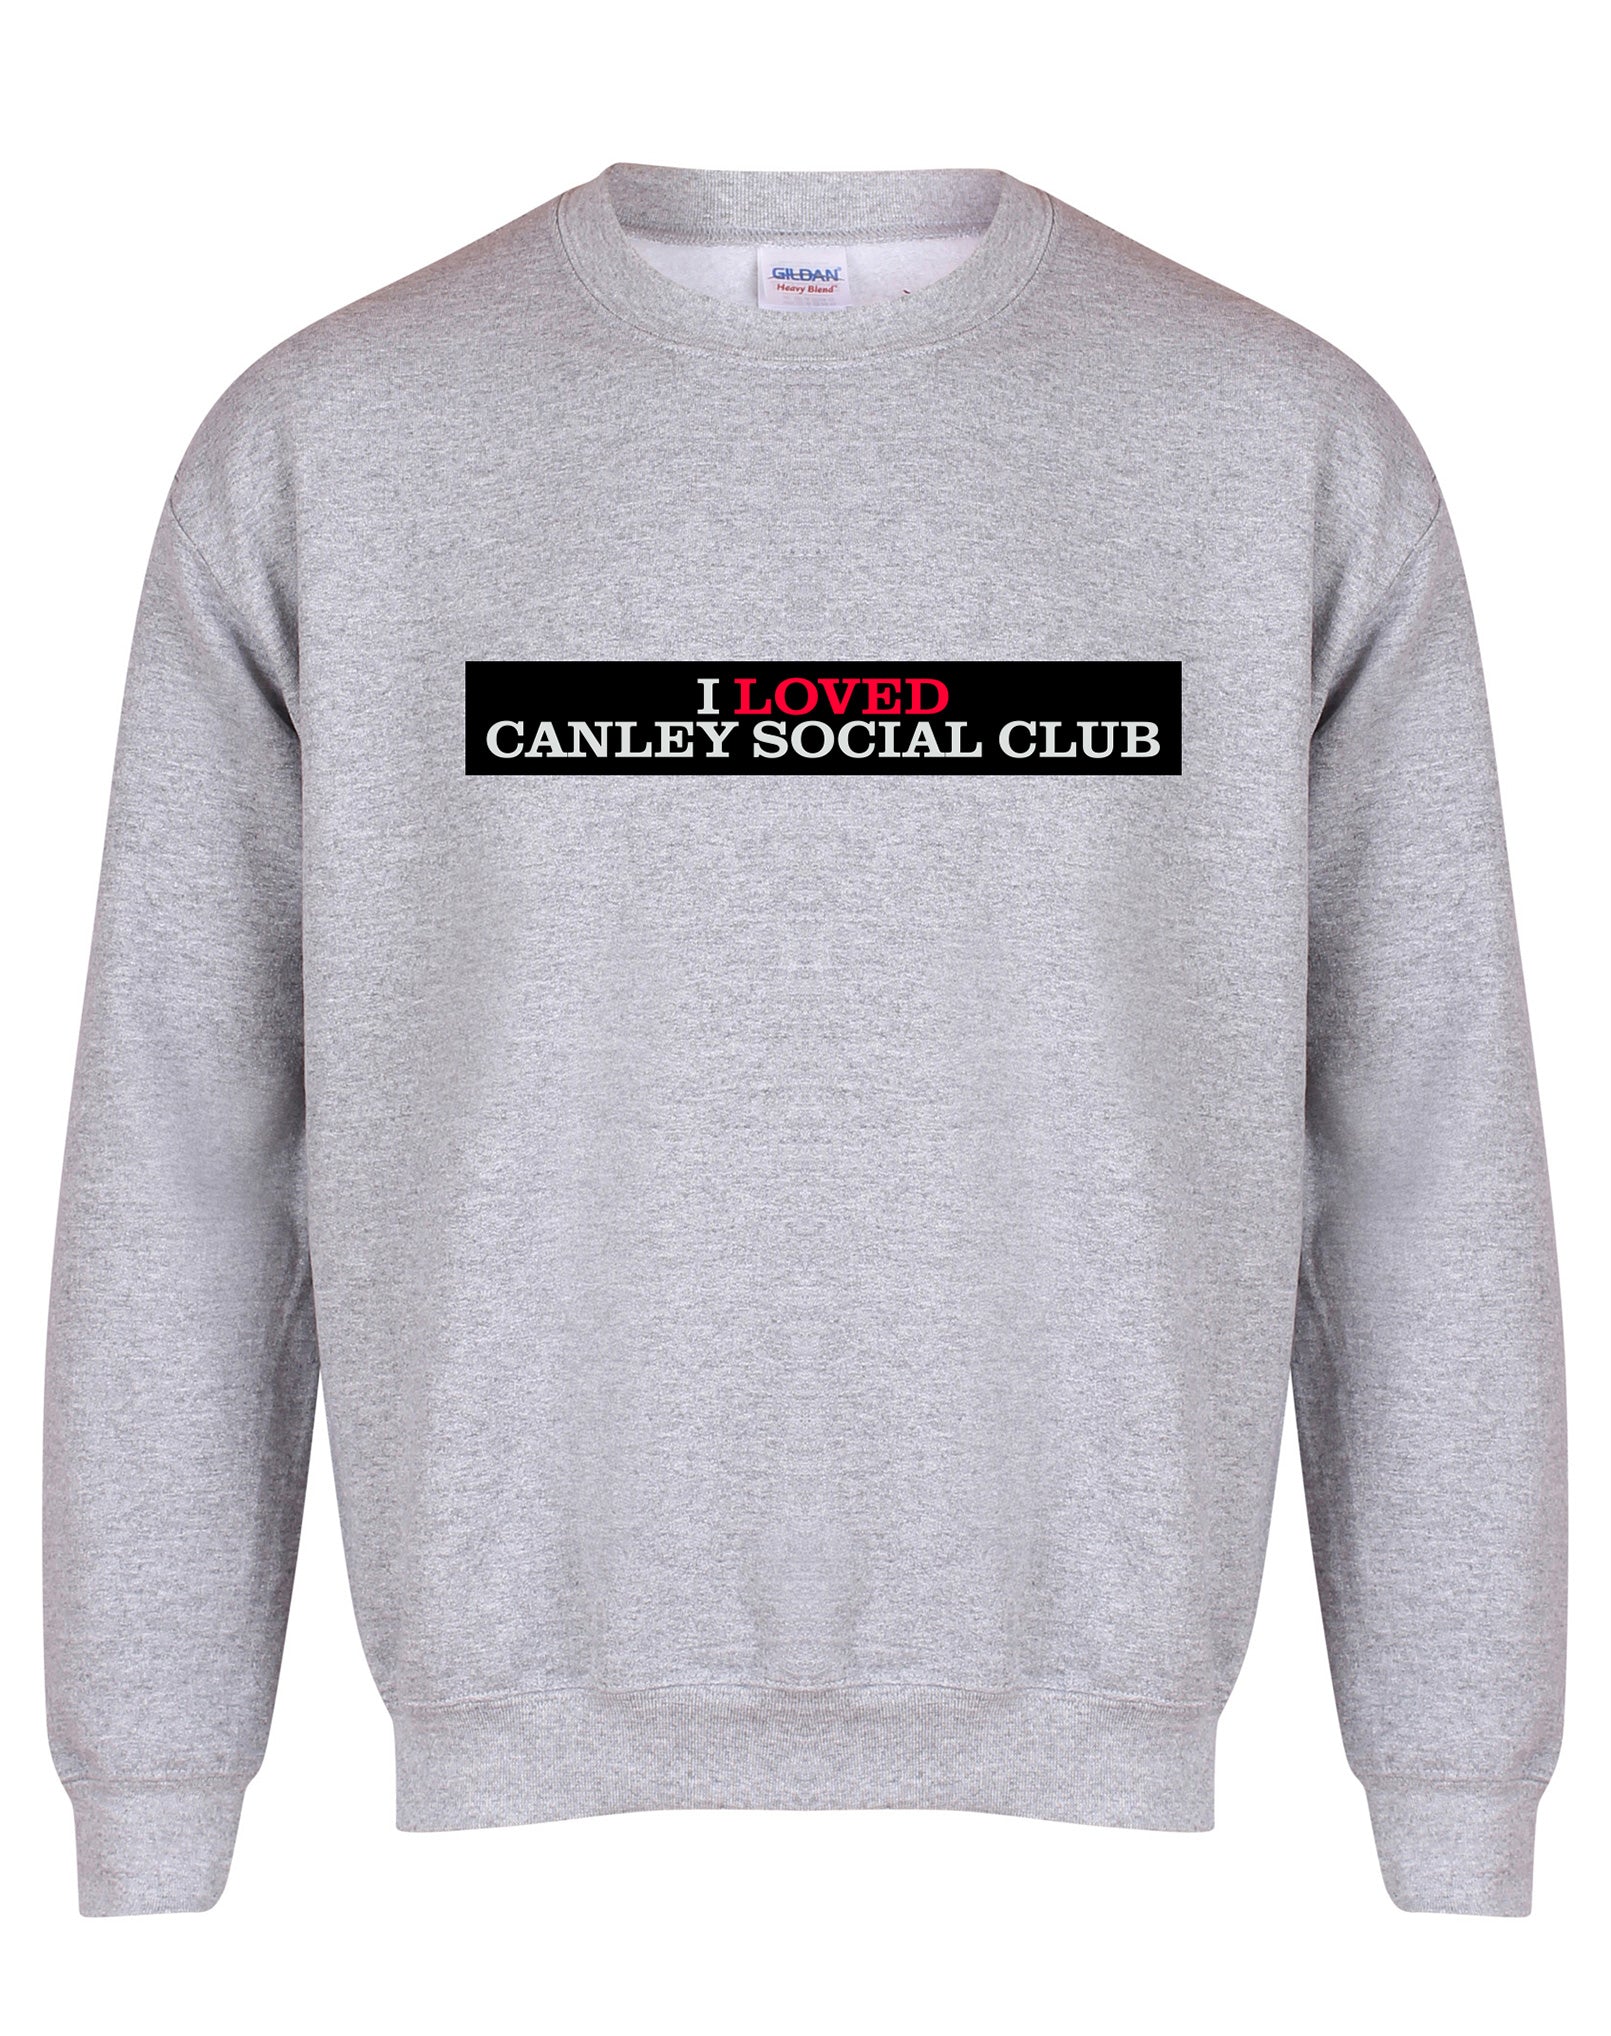 I Loved Canley Social Club unisex sweatshirt - various colours - Dirty Stop Outs